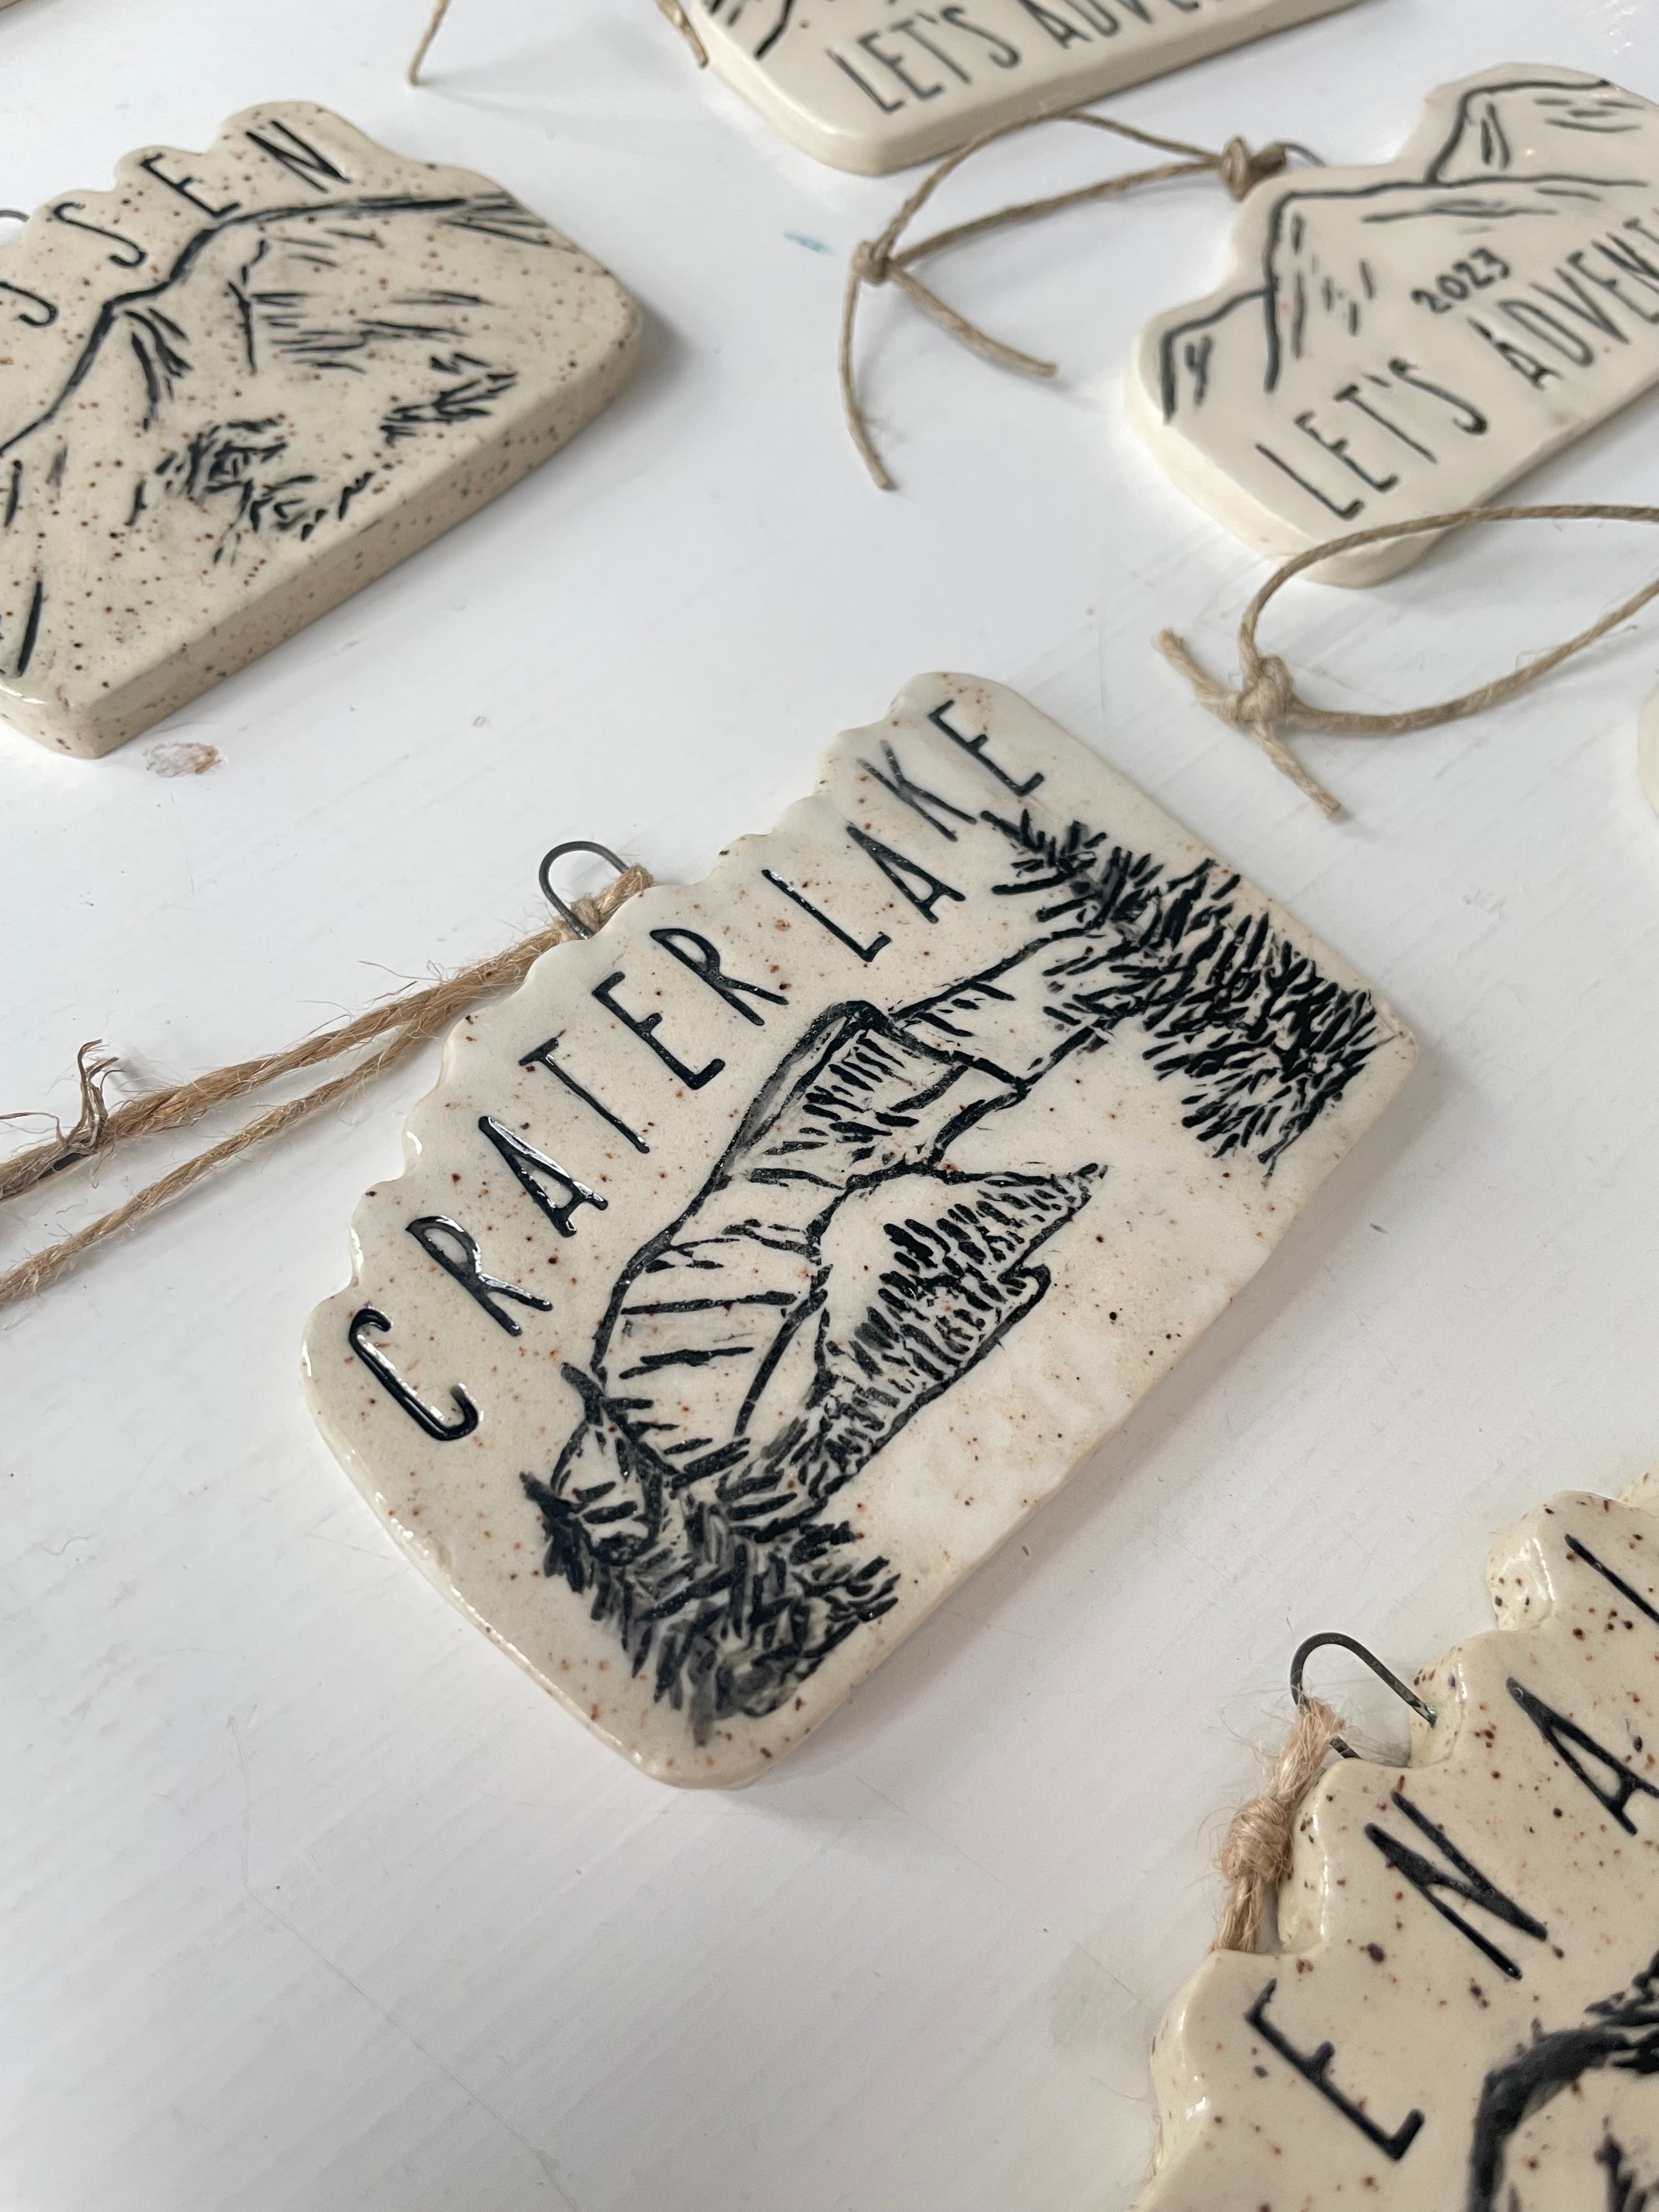 Hand-Carved Ceramic Ornaments. Black Ink designs of mountains and national parks. Shown is a design of Crater Lake.